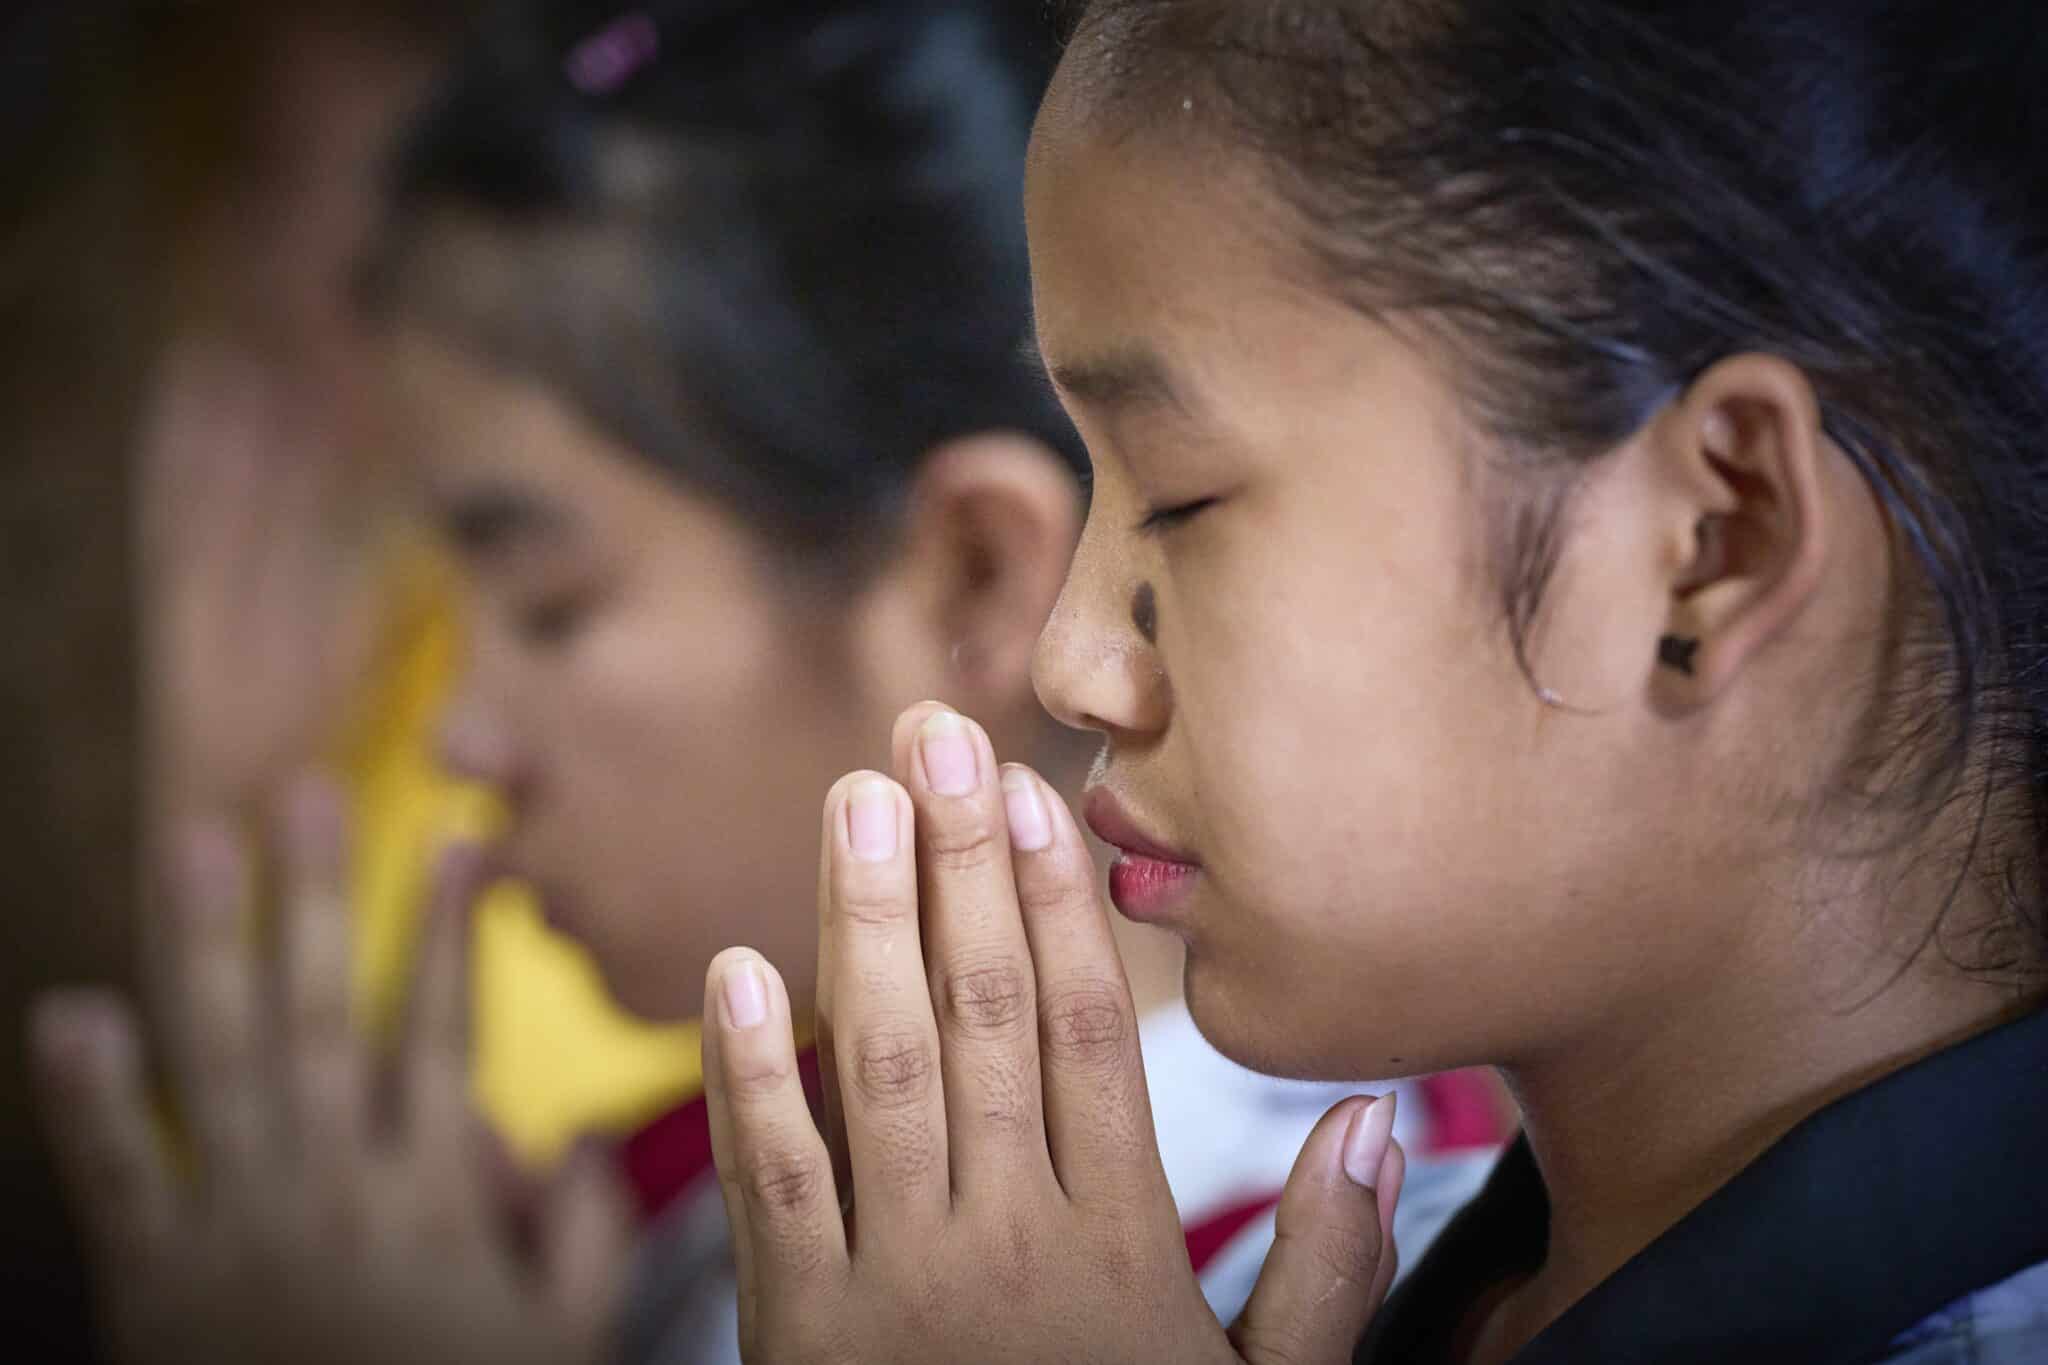 A girl prays in St. Mary's Catholic Church in the Ban Mai Nai Soi refugee camp in Thailand Sept. 27, 2022. The camp is home to thousands of refugees from Myanmar; many Myanmar Christians remain in their country but have fled their villages and live in camps. (CNS photo/Paul Jeffrey)